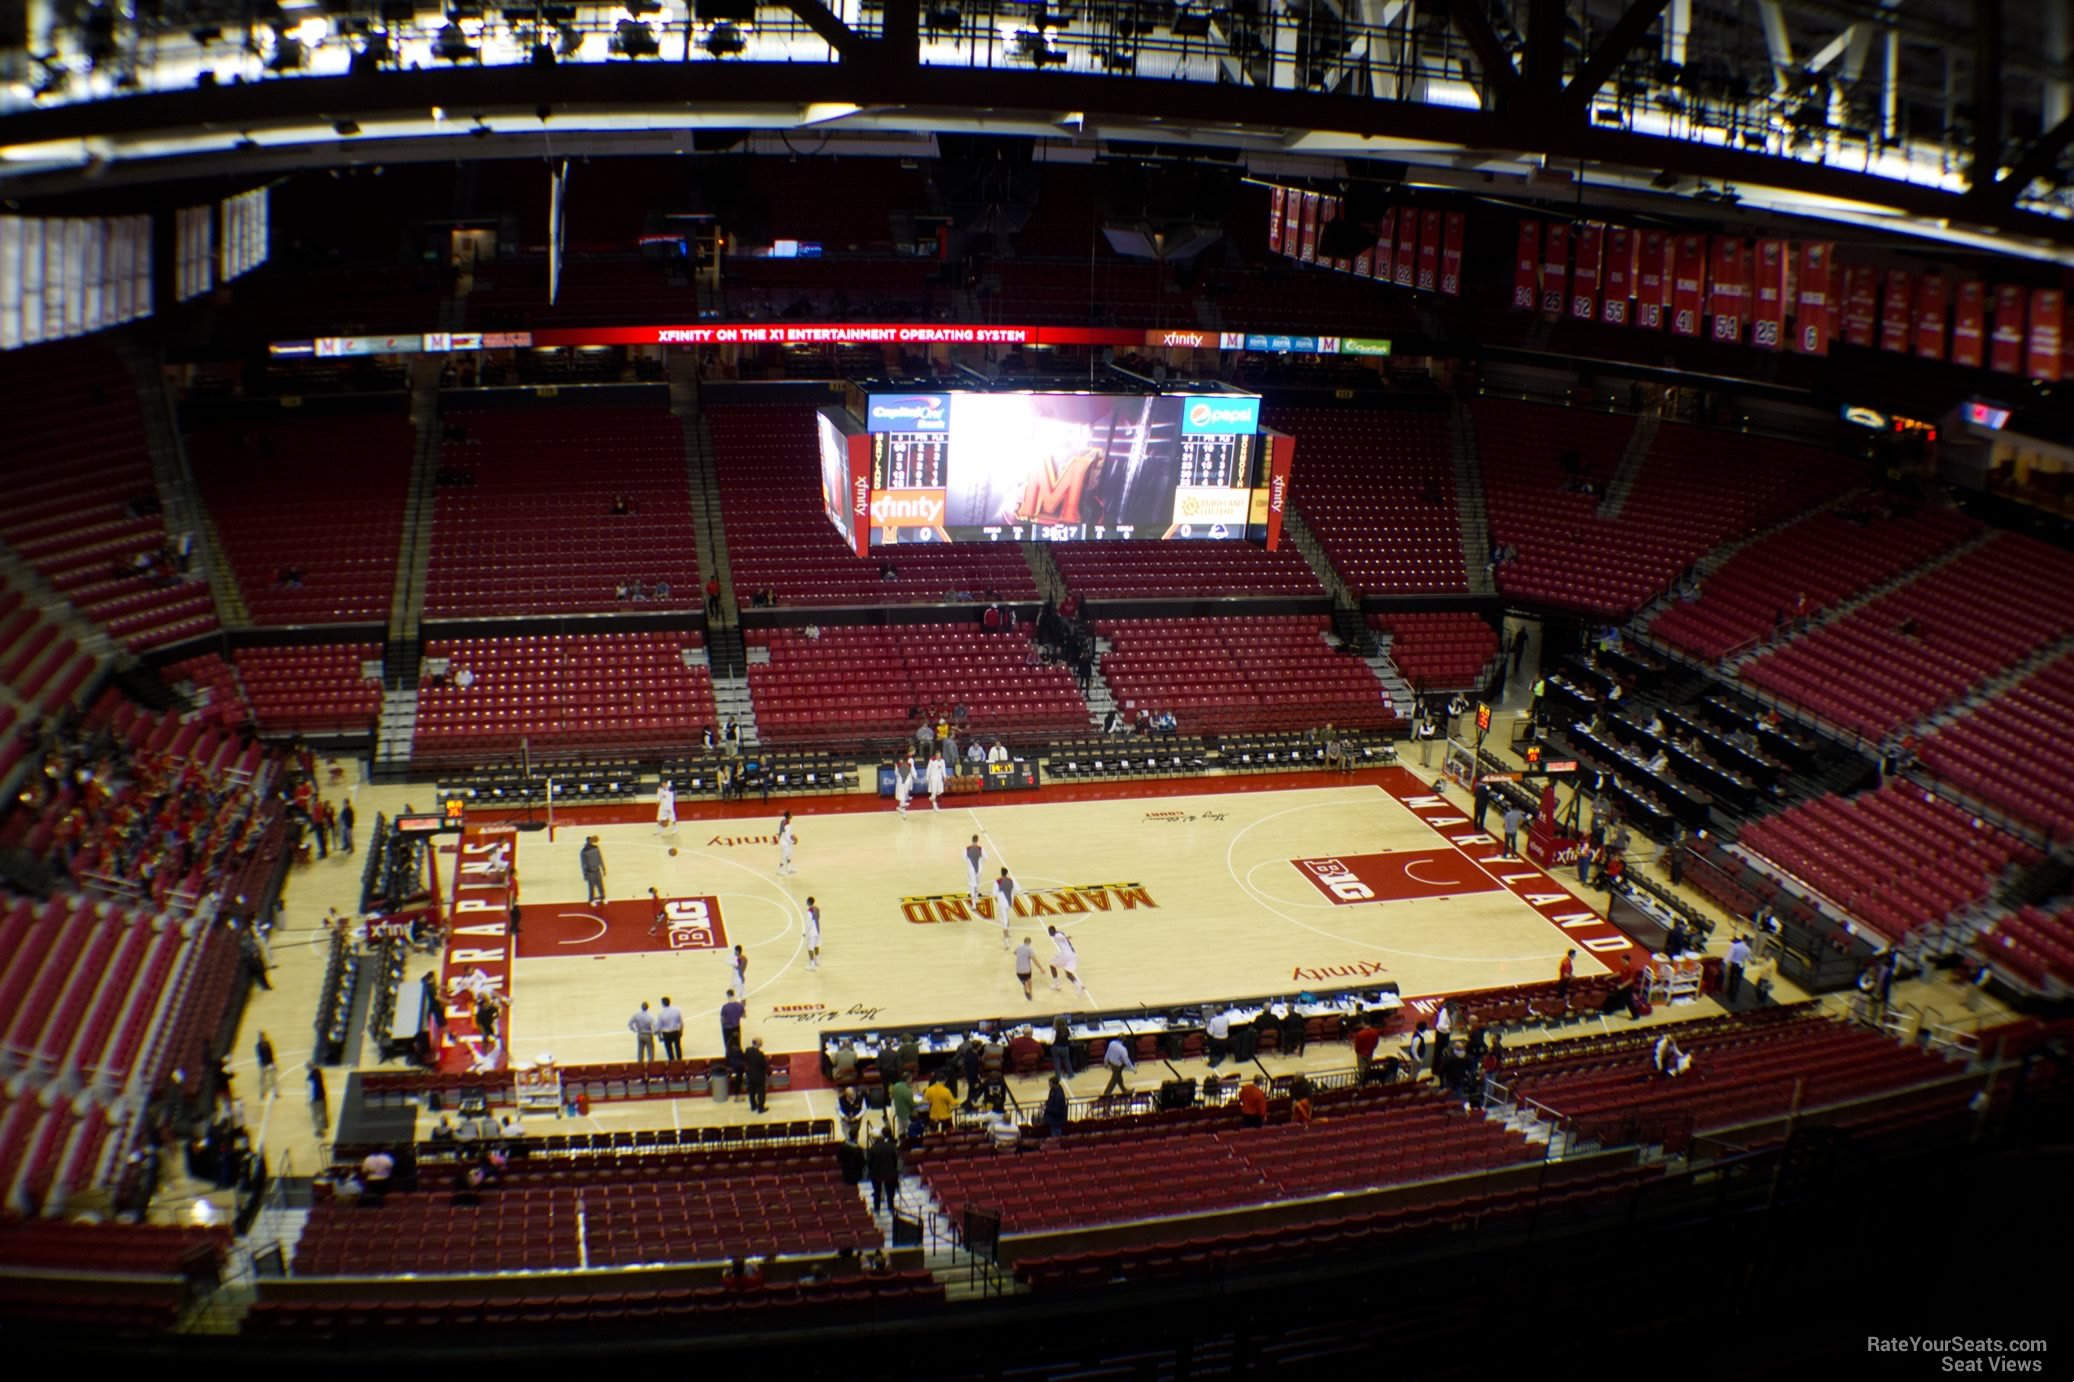 section 226, row 11 seat view  - xfinity center (maryland)